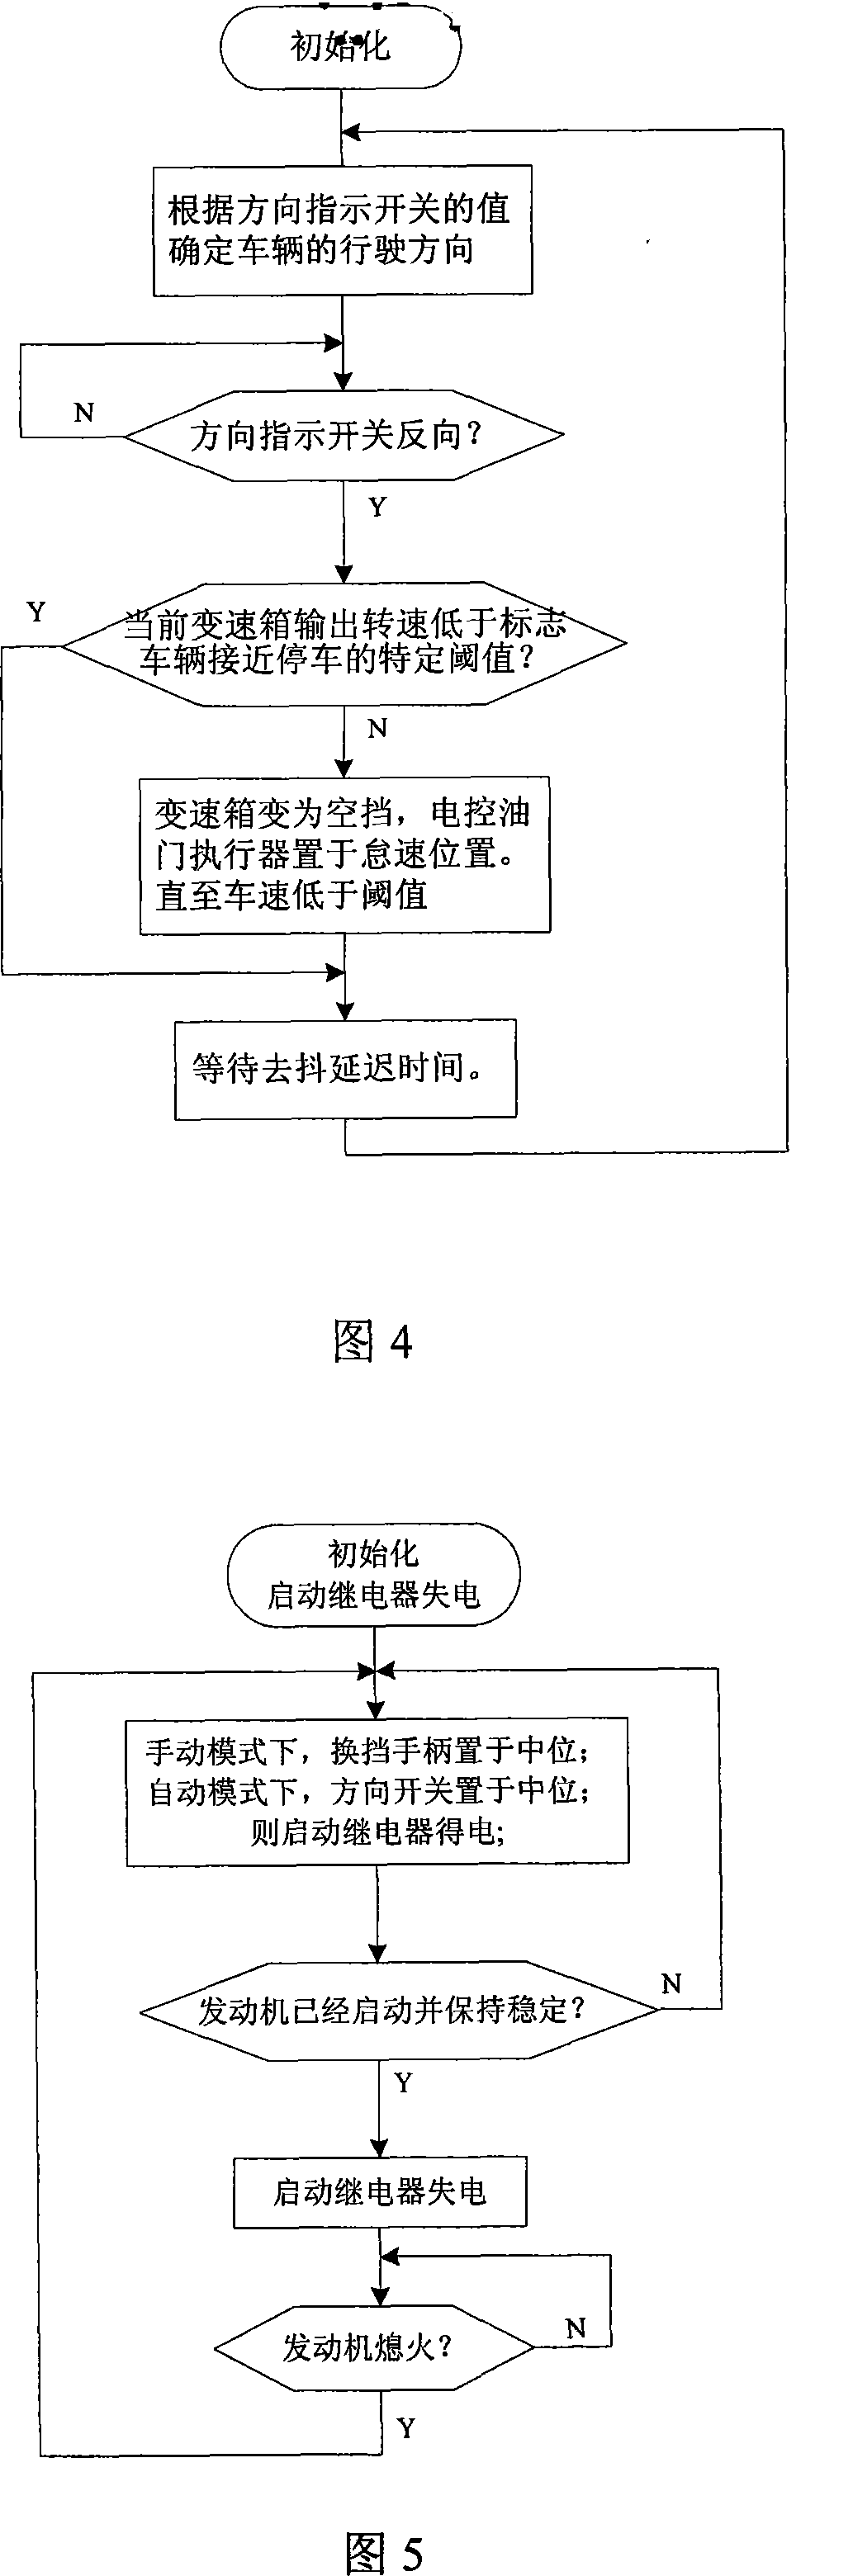 Hydraulic-mechanical transmission engineering machinery automatic shifting speed variator and control method